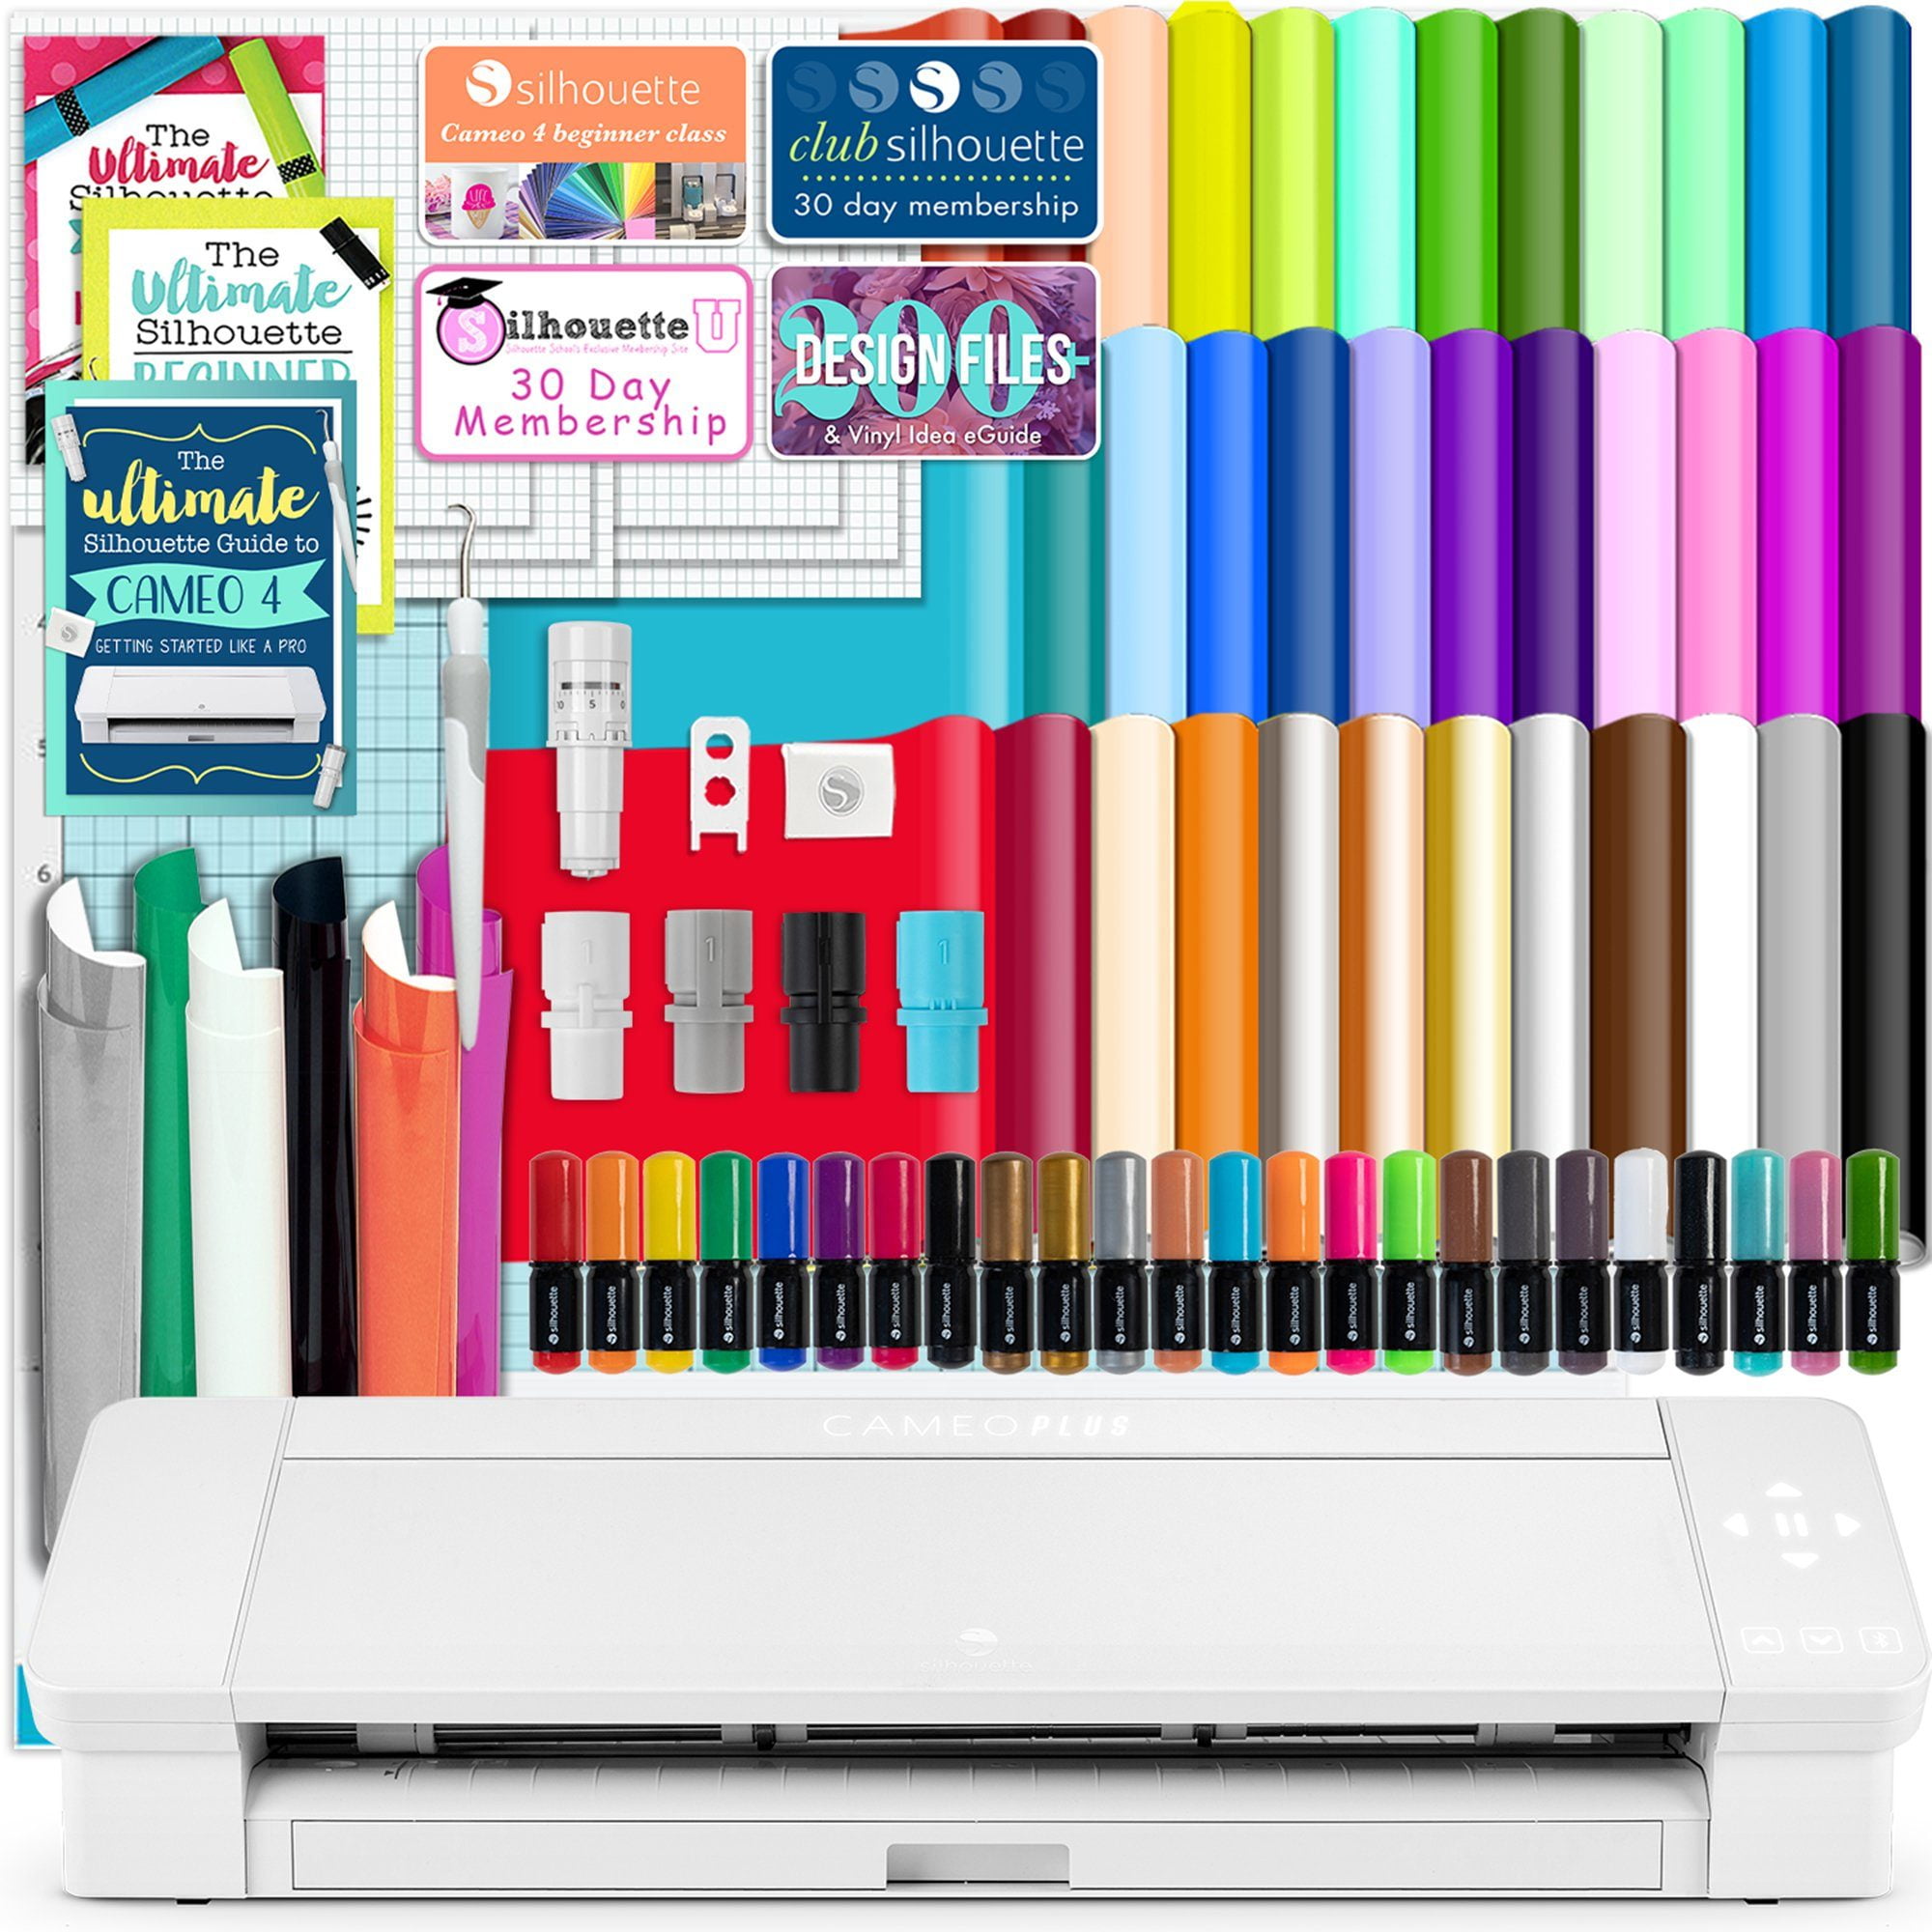  Silhouette Cameo 4 White Bundle with Vinyl Starter Kit, Heat  Transfer Starter Kit, 2 Autoblade 2, 24 Pack of Pens, CC Vinyl Tool Kit,  130 Designs, and Access to Ebooks, Tutorials, & Classes